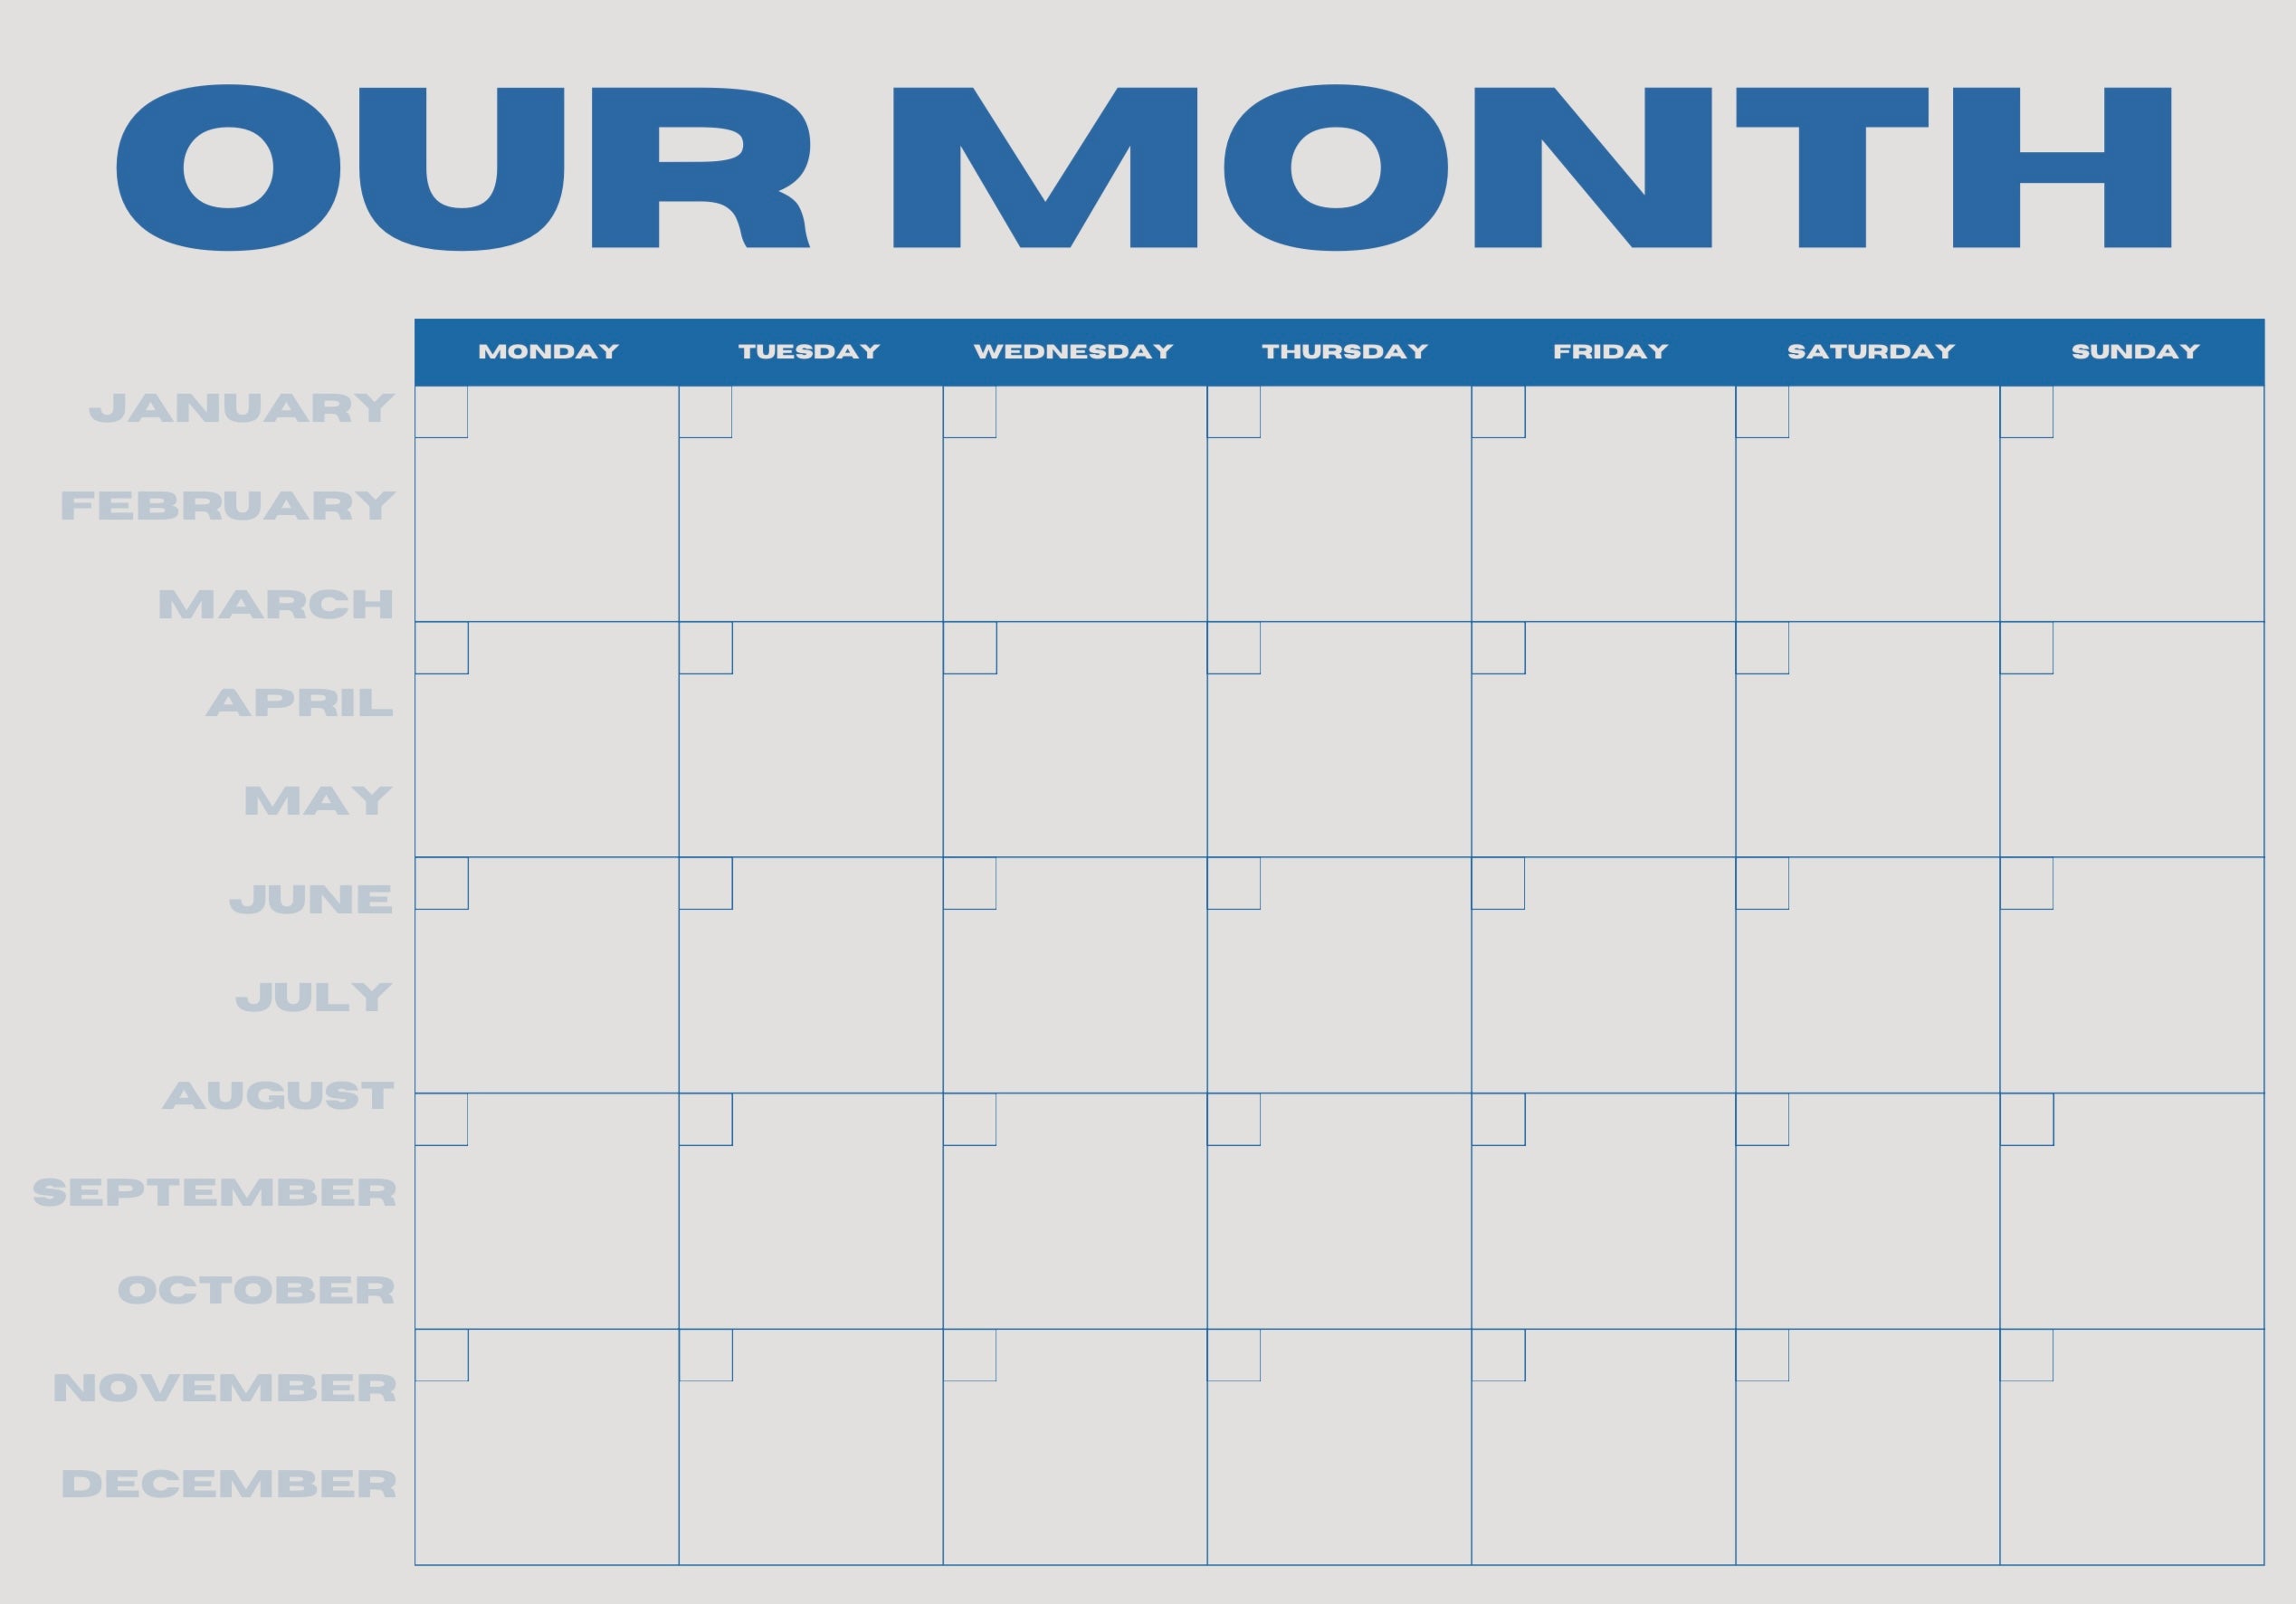 Our Month Planner - Blue